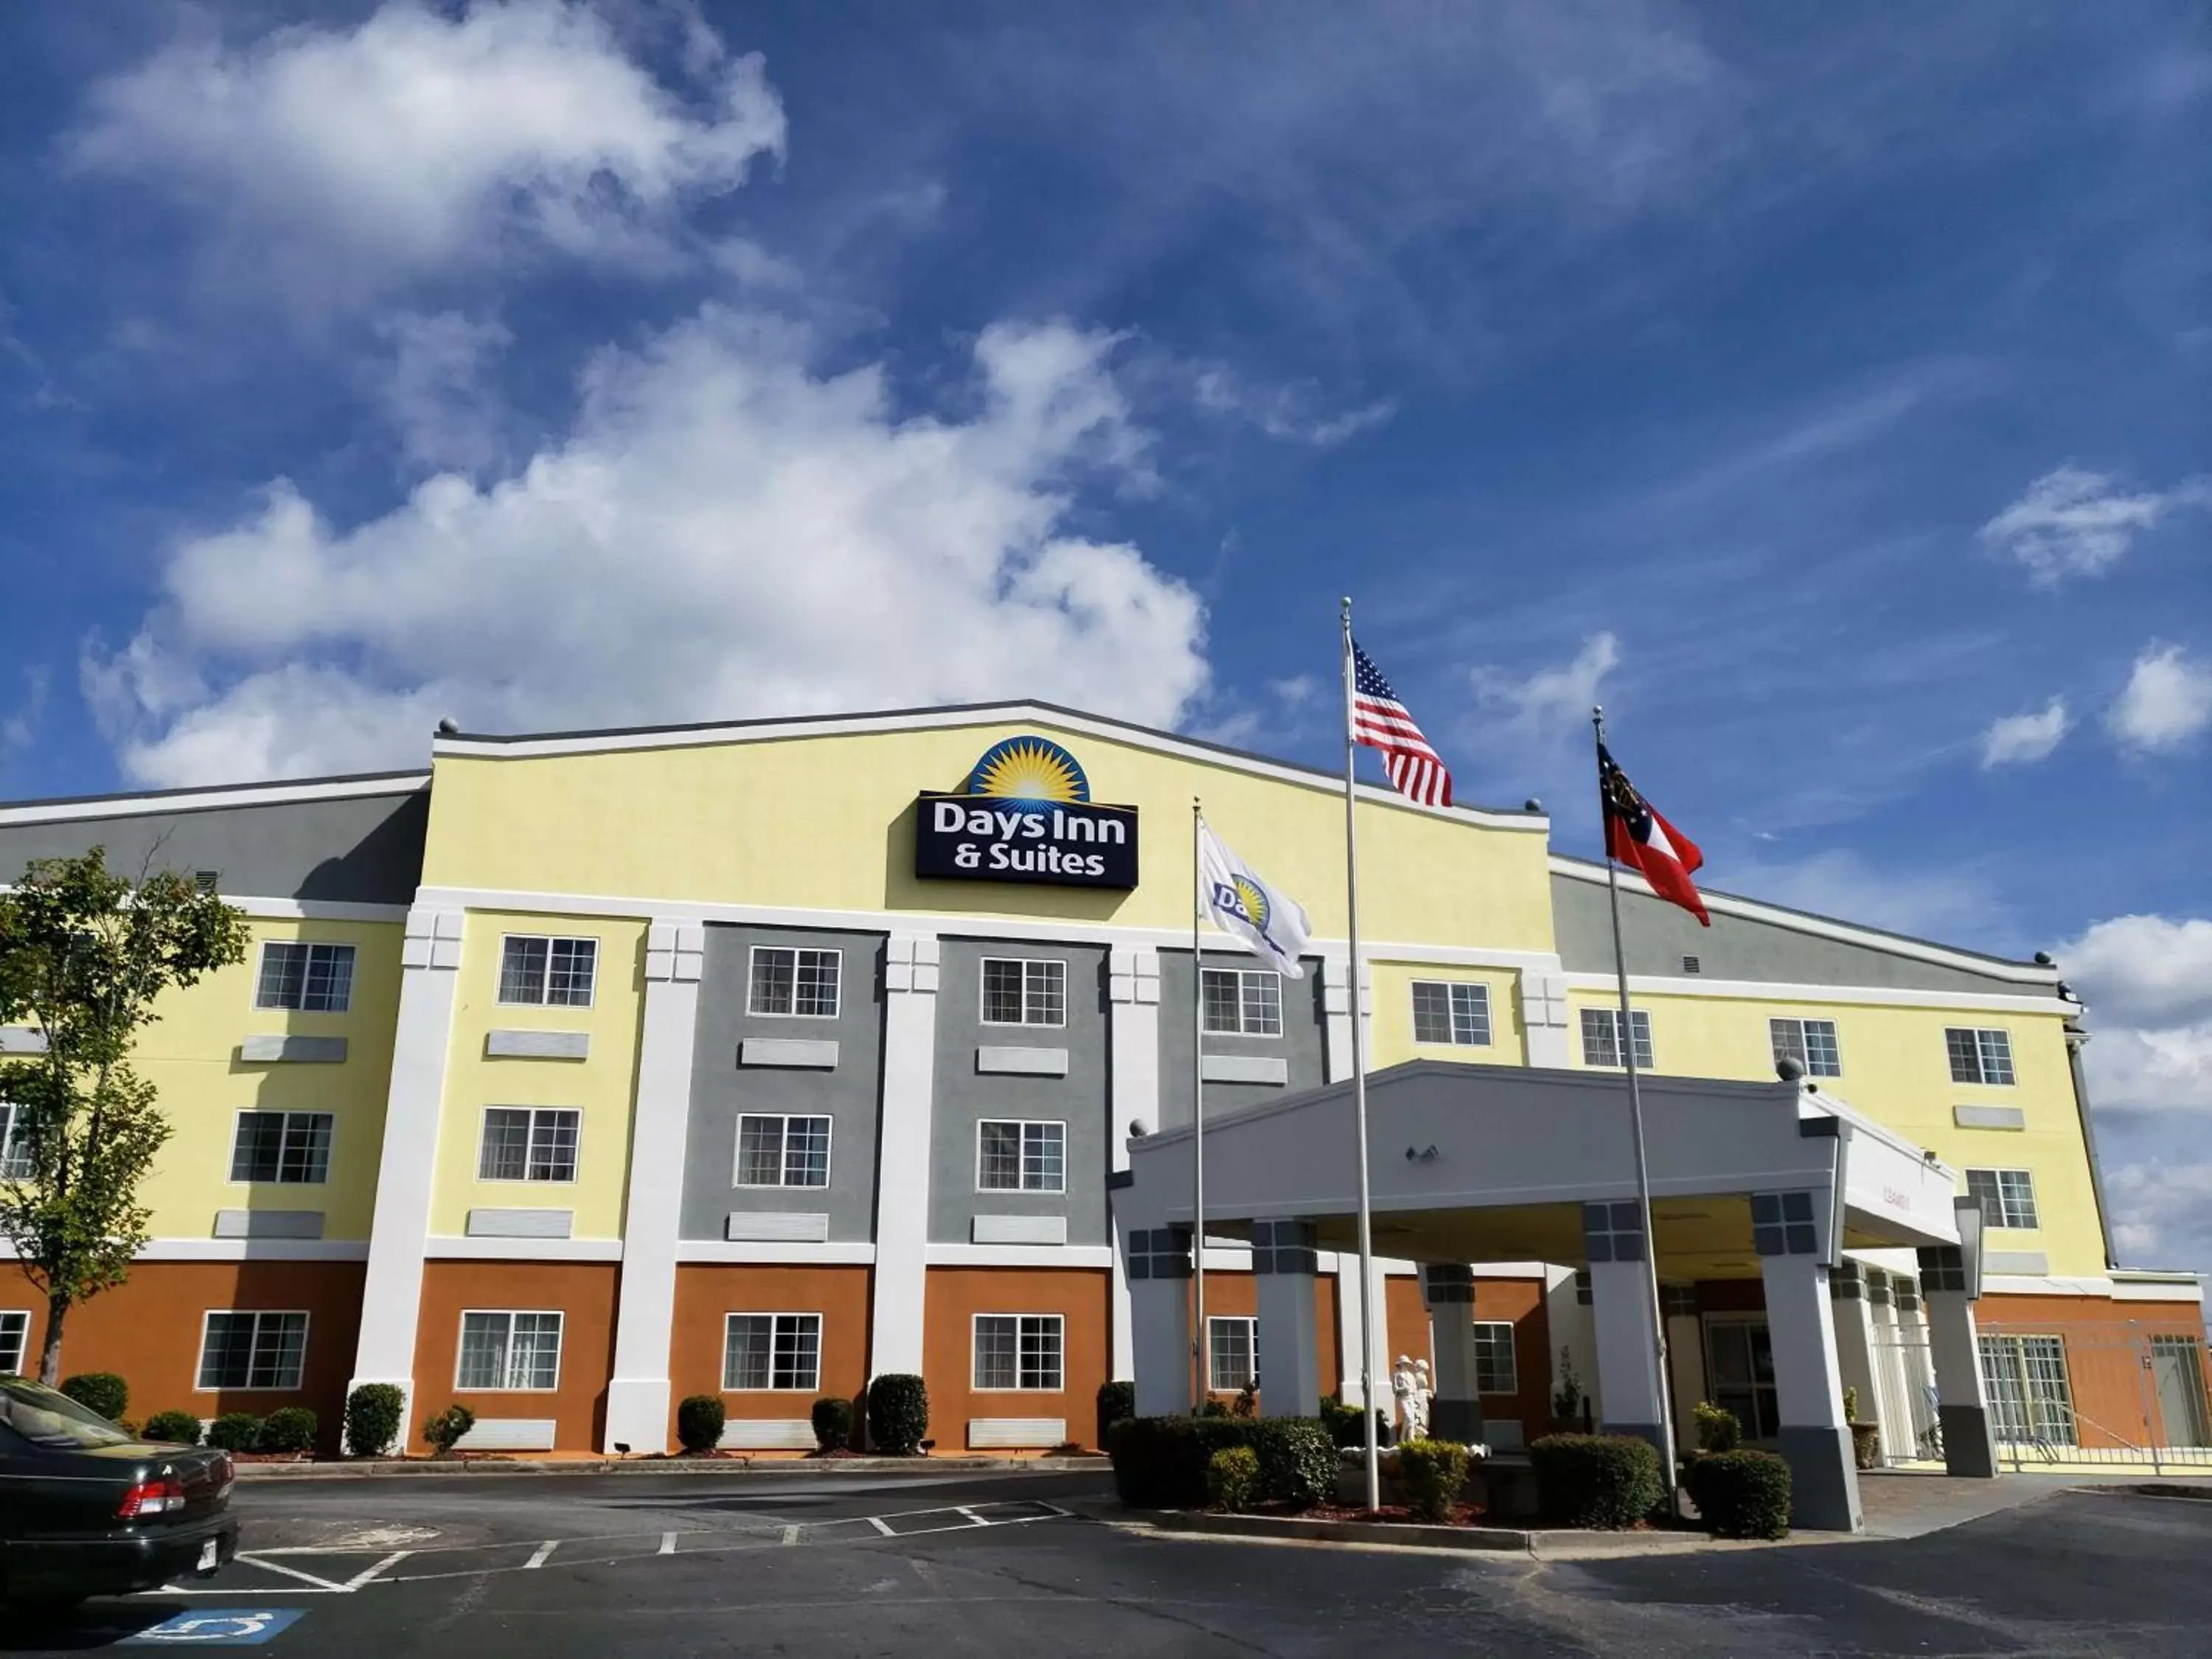 Property Building in Days Inn & Suites by Wyndham Union City